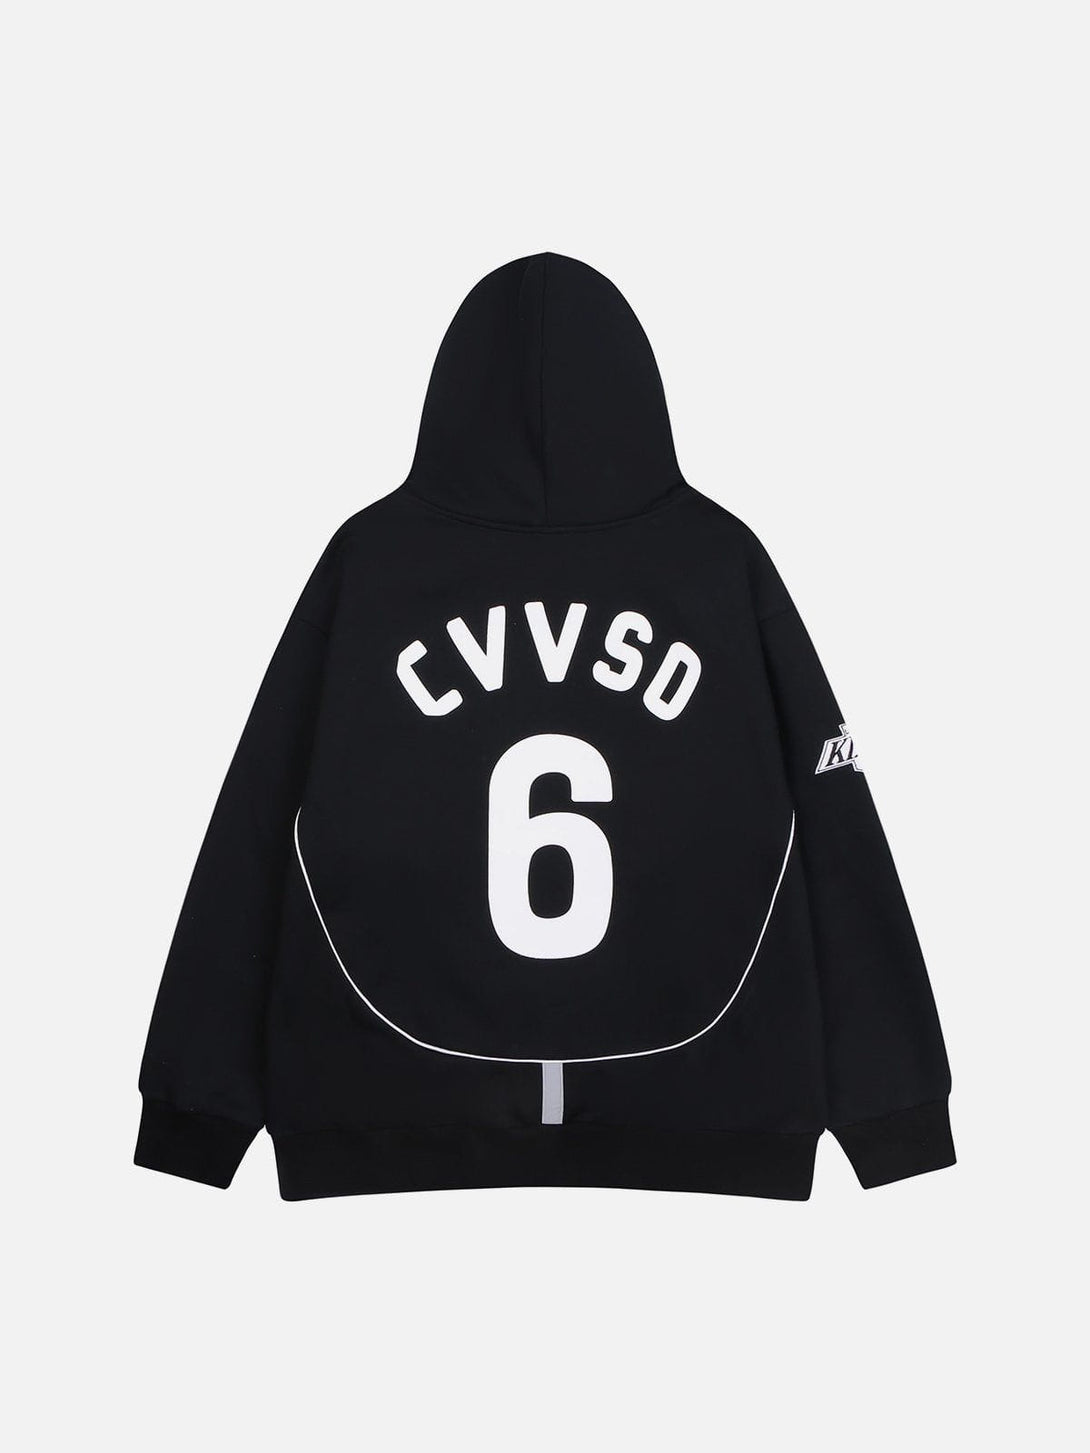 Levefly - Number Letter Print Hoodie - Streetwear Fashion - levefly.com